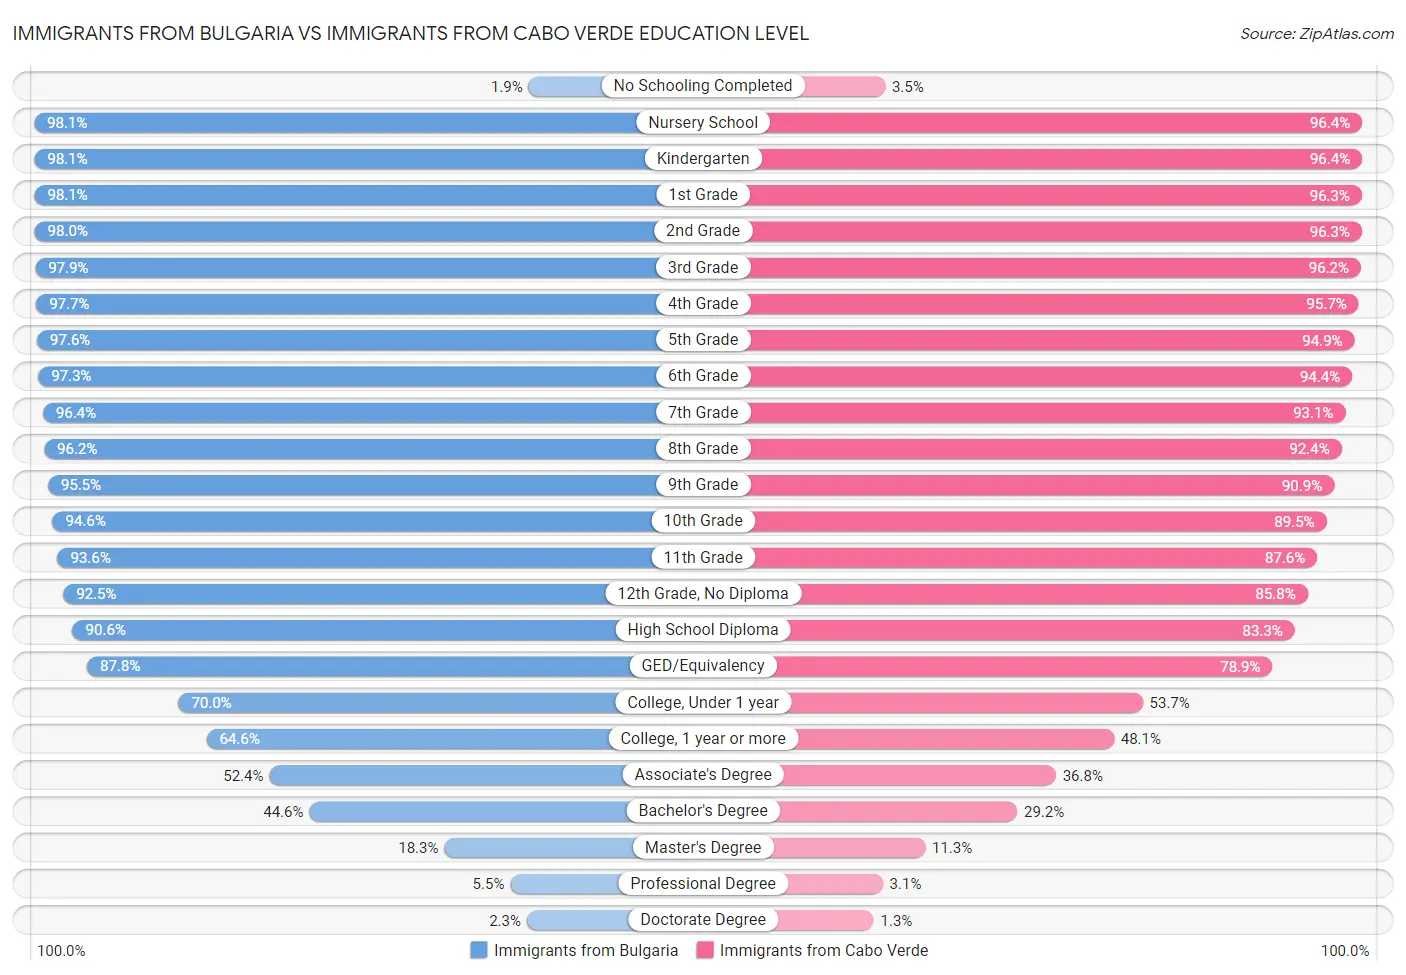 Immigrants from Bulgaria vs Immigrants from Cabo Verde Education Level